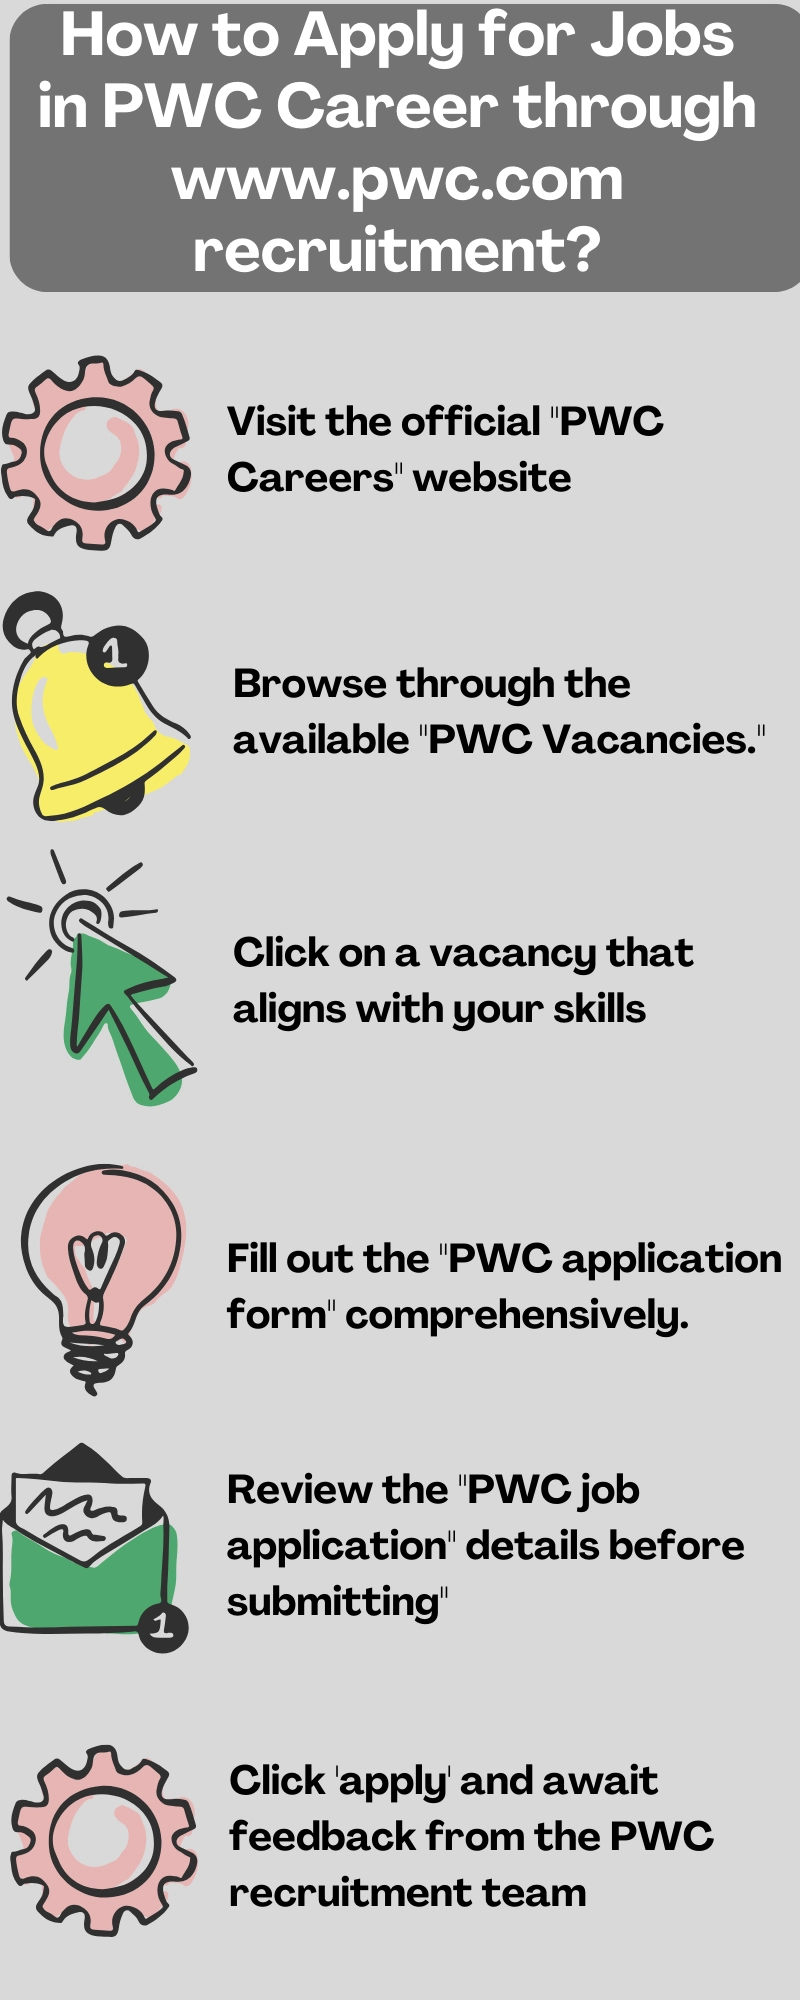 How to Apply for Jobs in PWC Career through www.pwc.com recruitment_ (1)